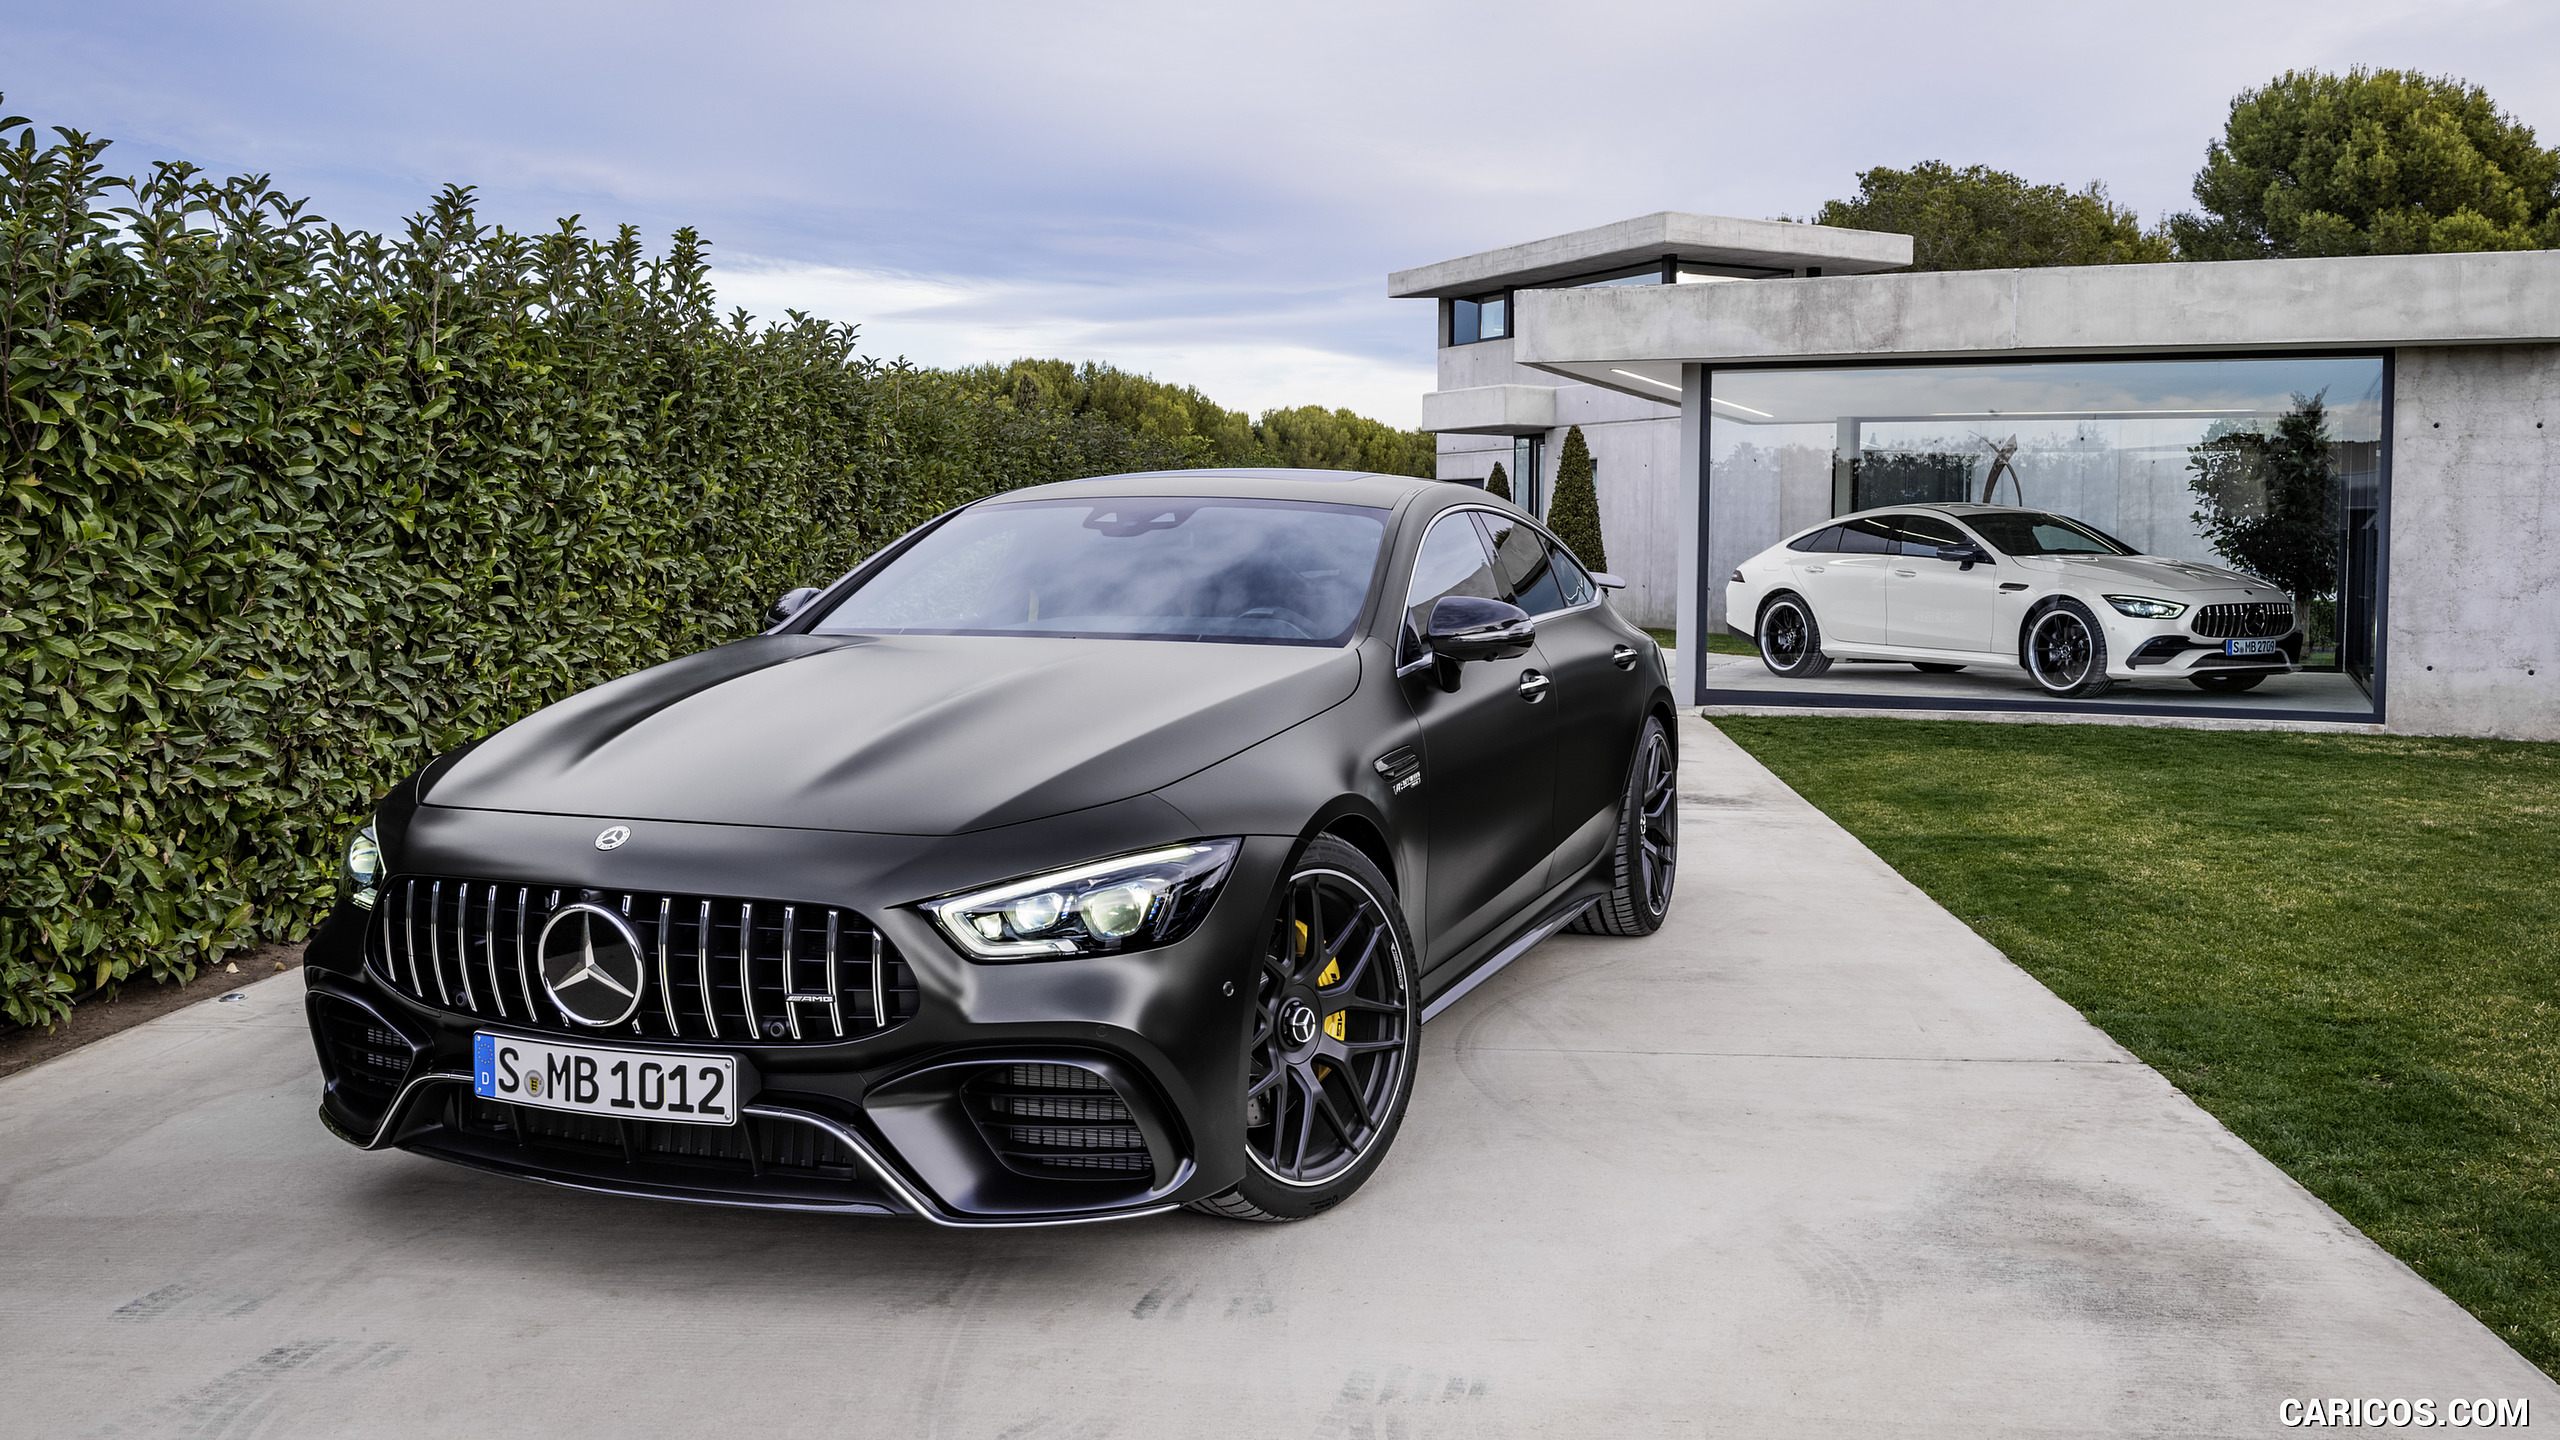 2019 Mercedes AMG GT 63 and 53 4MATIC 4 Door Coupe HD Wallpaper 43